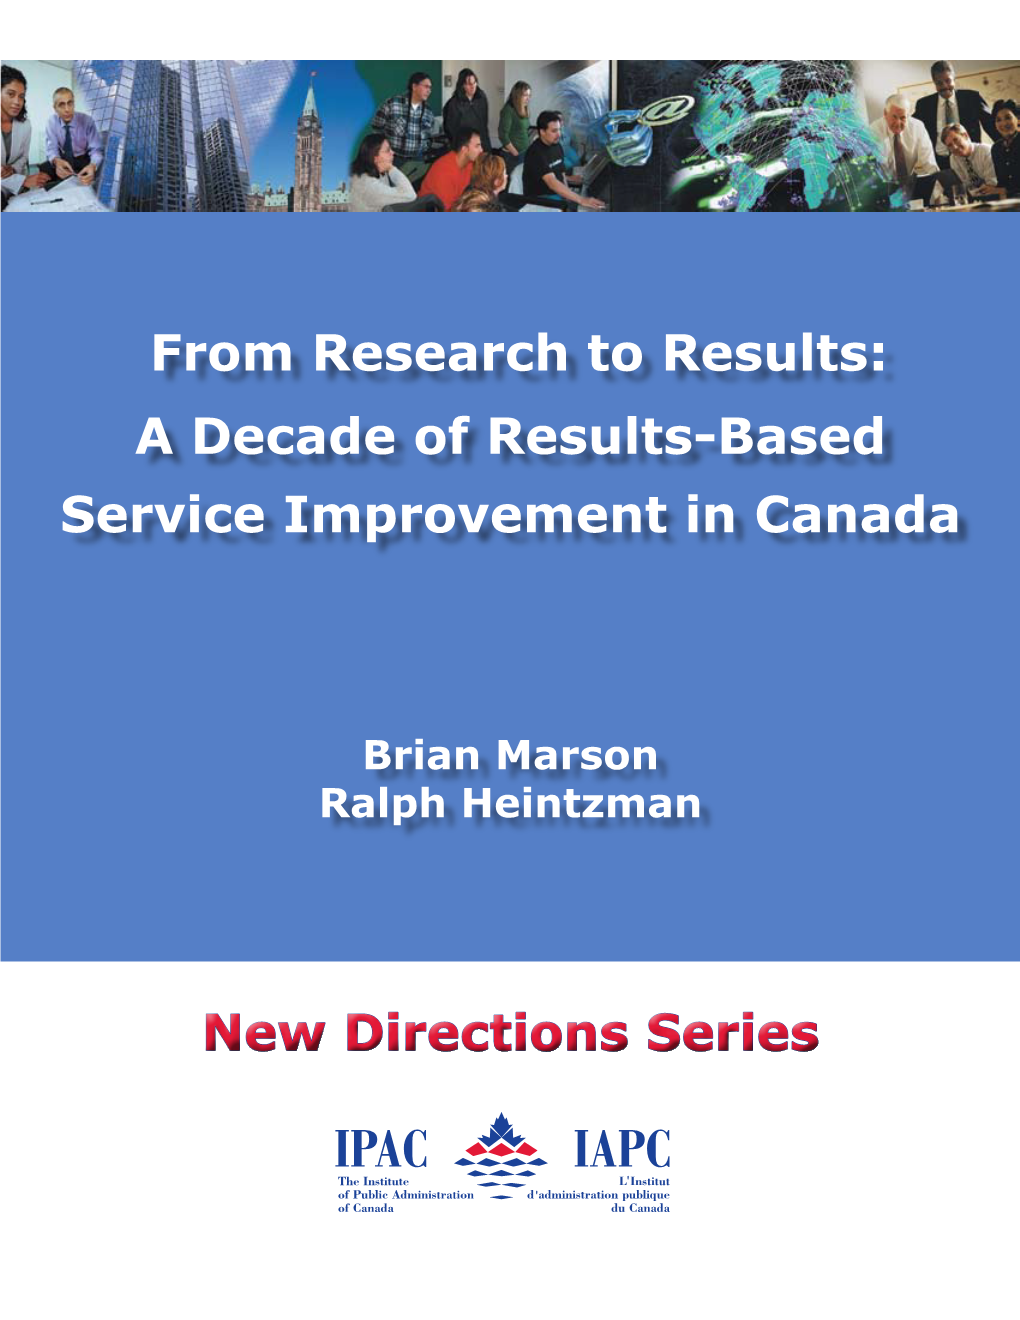 From Research to Results: a Decade of Results-Based Service Improvement in Canada